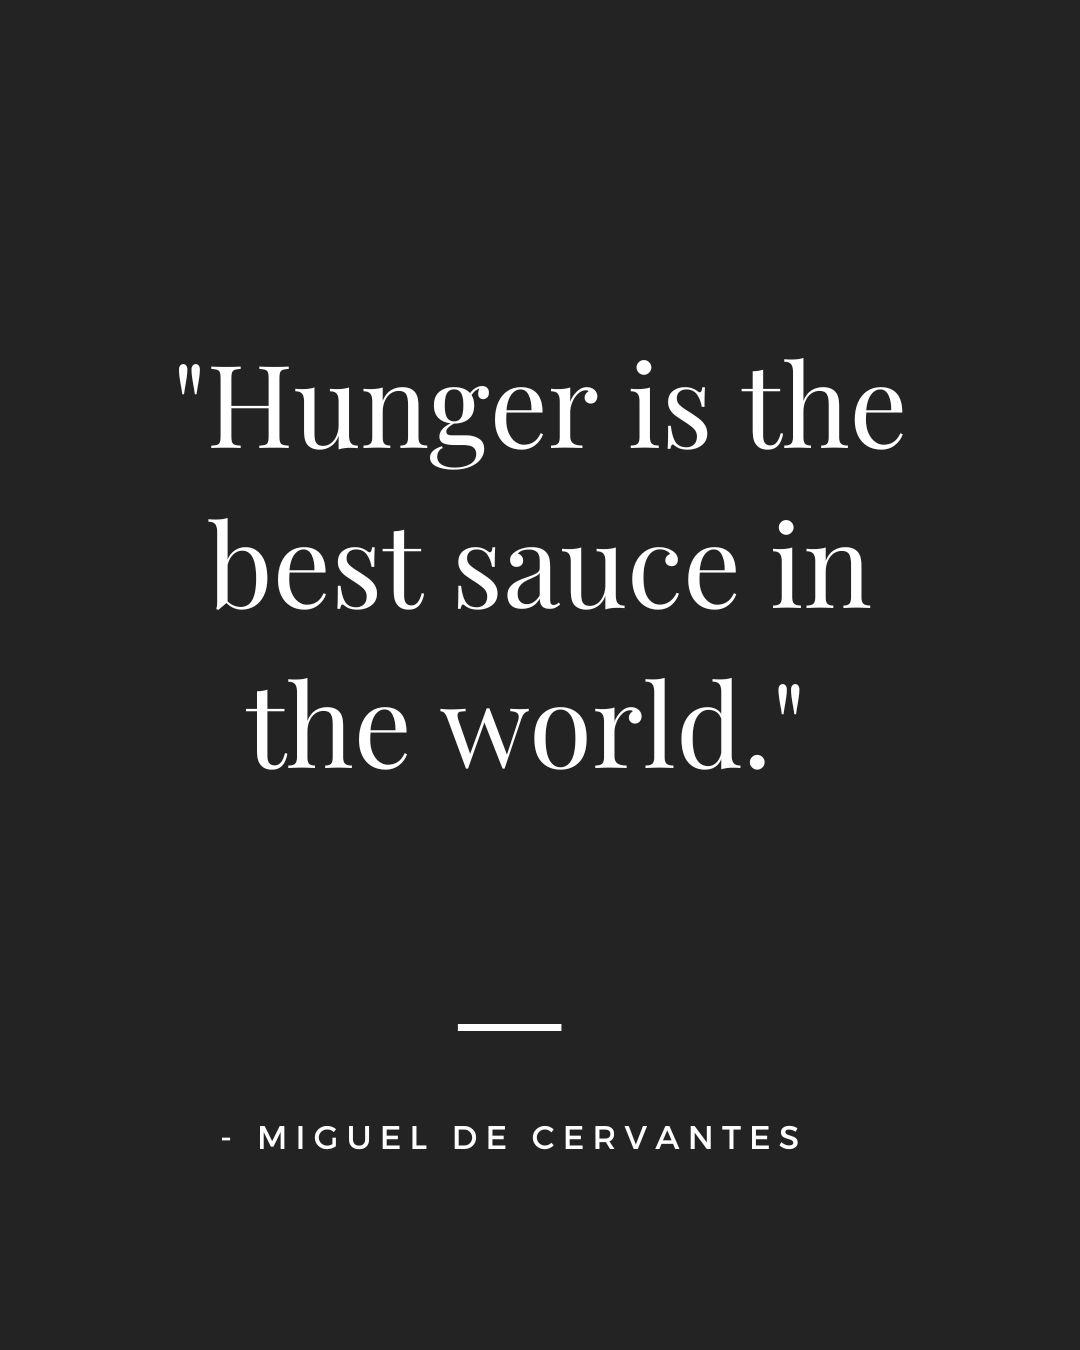 Hungry Quotes